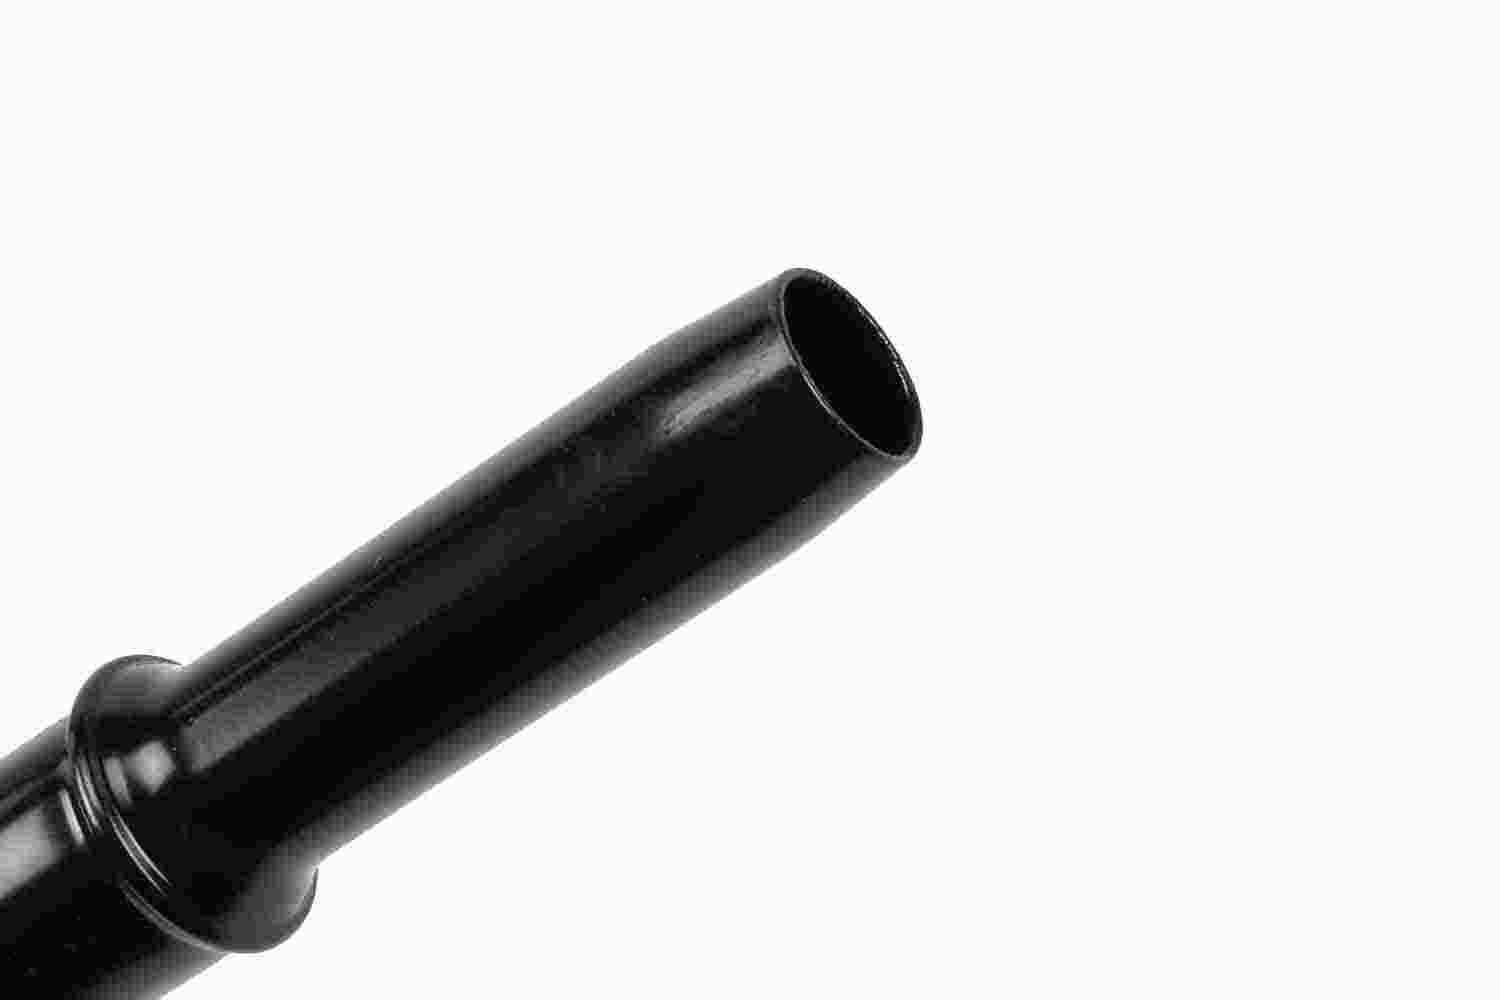 GM GENUINE PARTS CANADA - Automatic Transmission Fluid Filler Tube - GMC 15281541